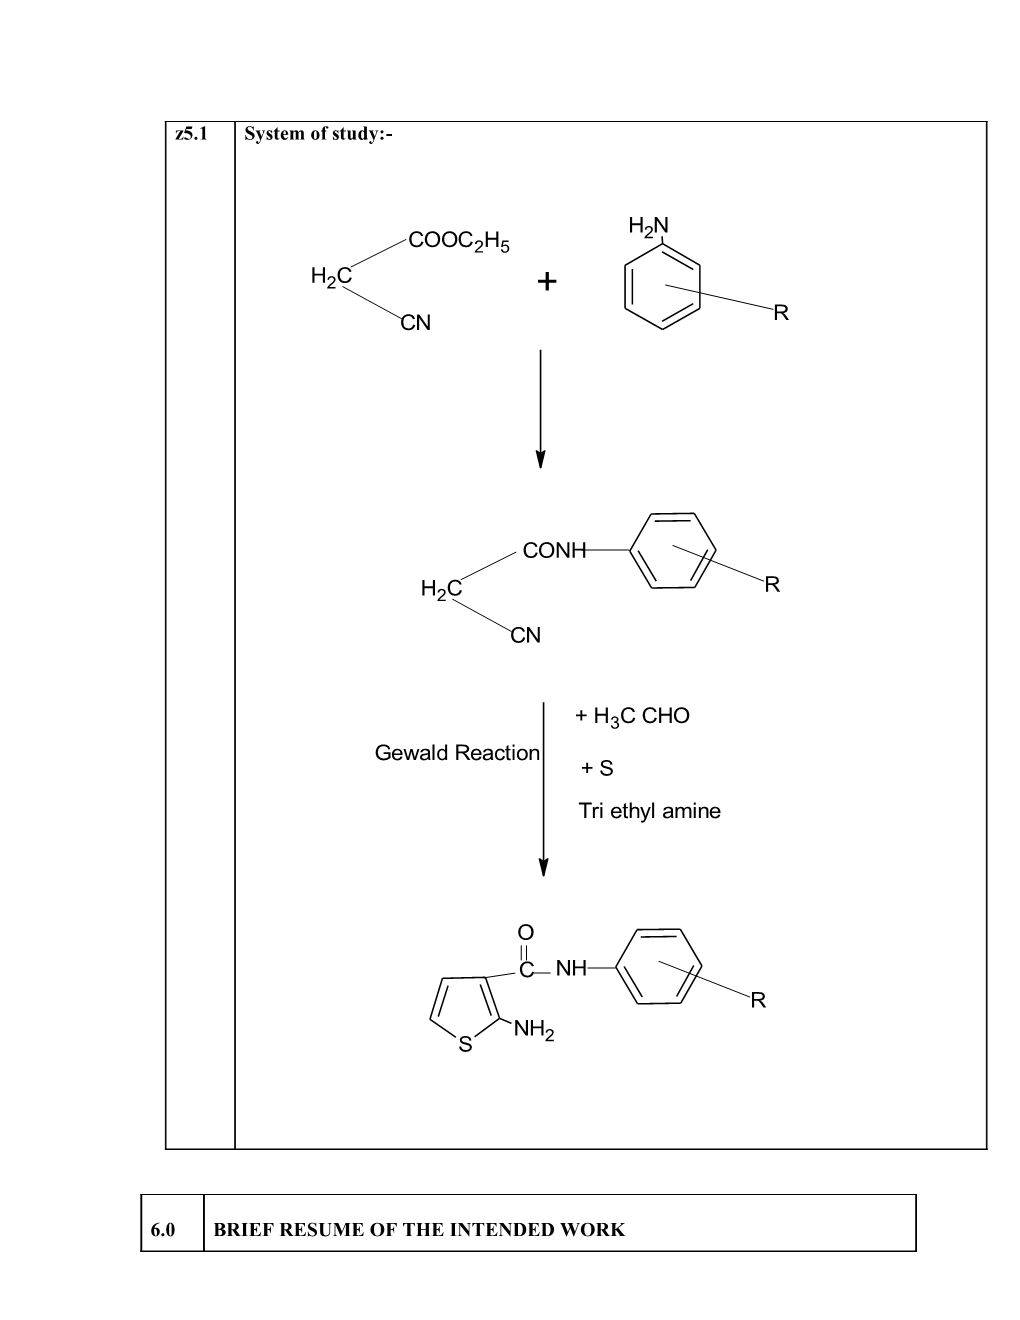 To Synthesize New Thiophene Derivative Having Better Pharmacological Activity